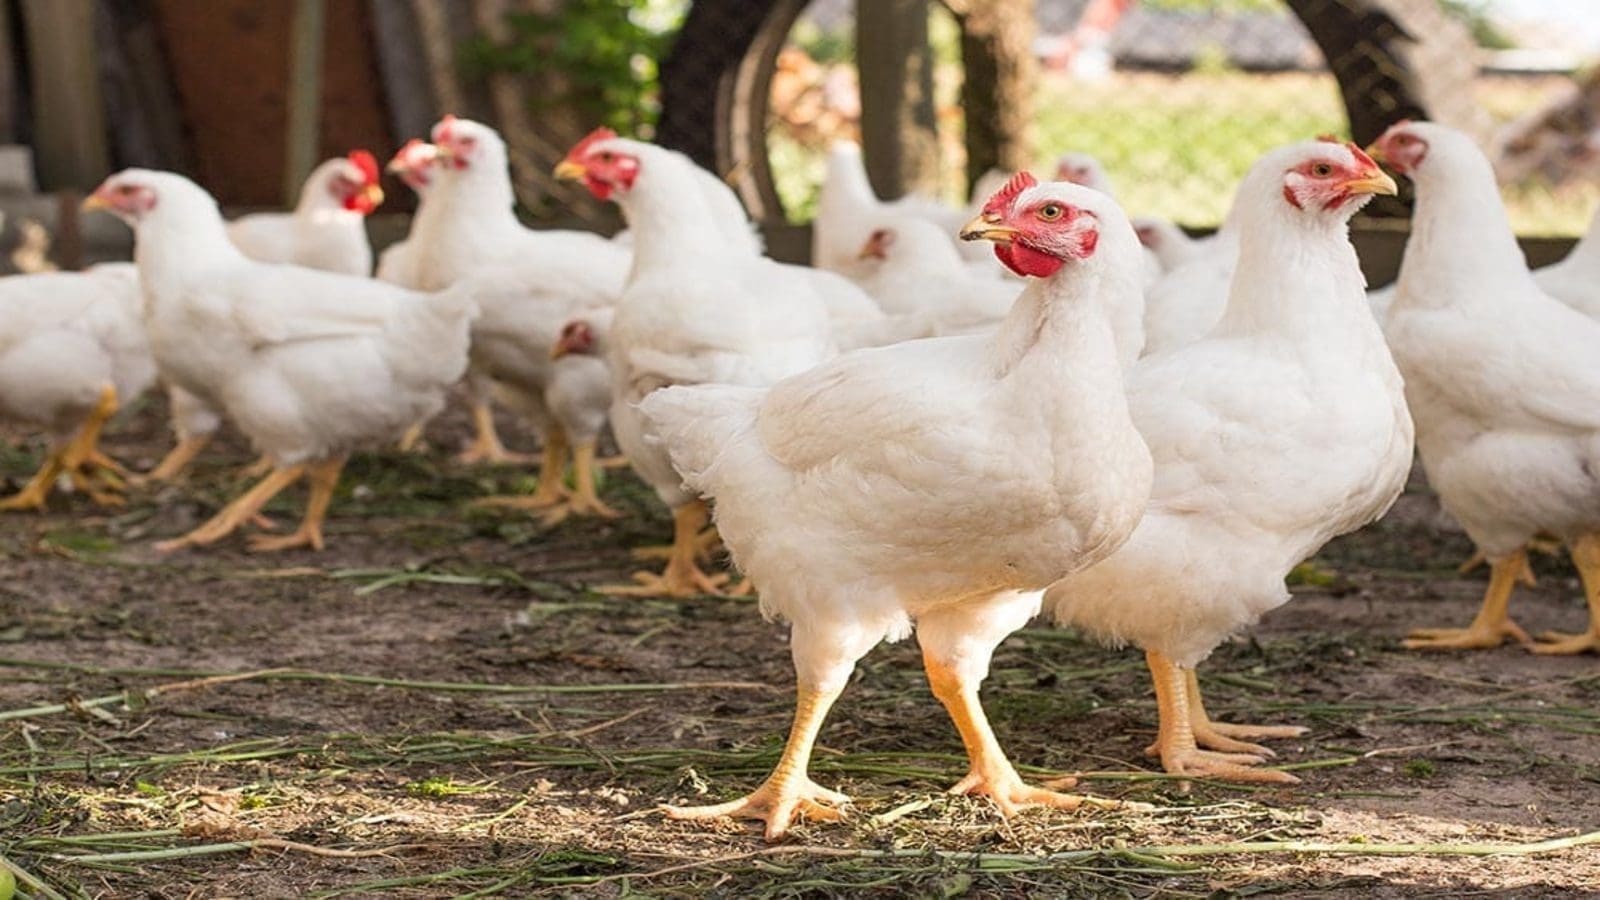 Perdue AgriBusiness and ZeaKal work towards sustainable poultry through improved soy genetics